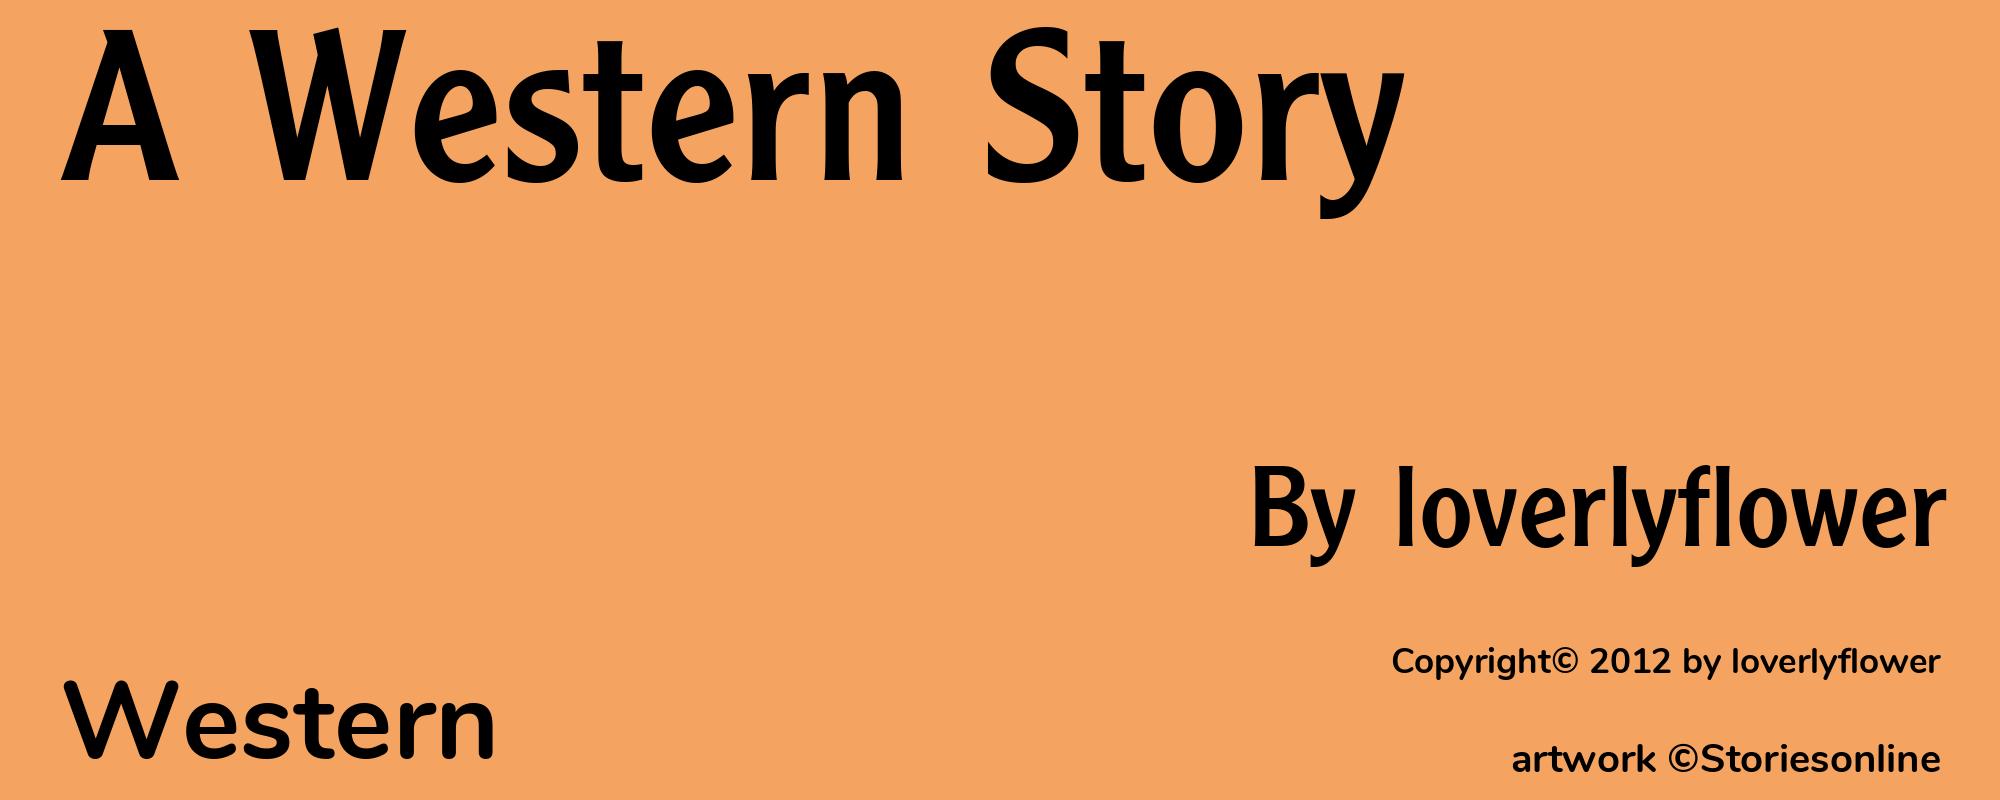 A Western Story - Cover